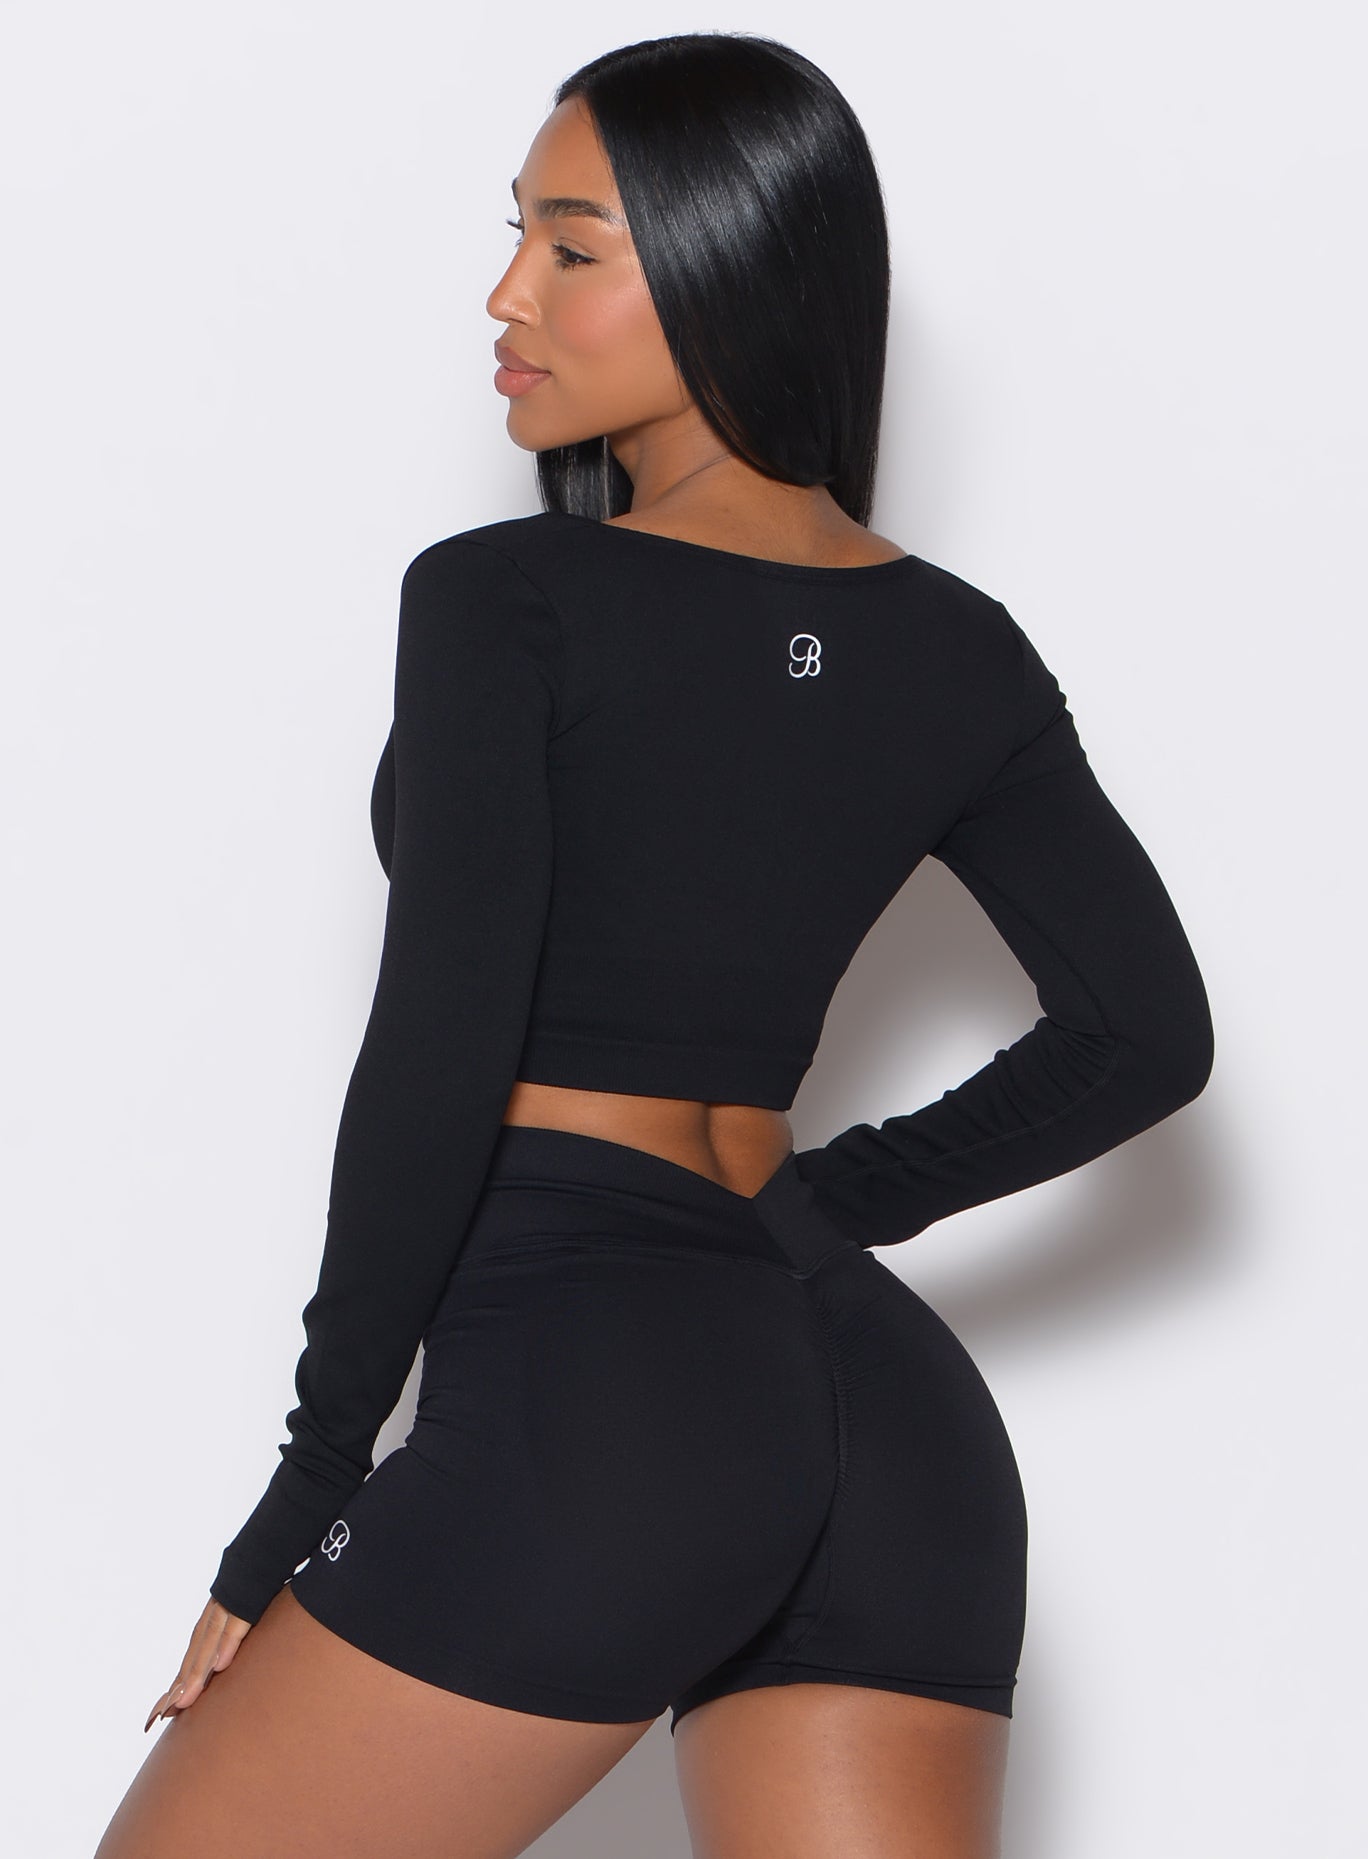 back profile view of a model wearing our black square neck seamless pullover complemented by a matching shorts